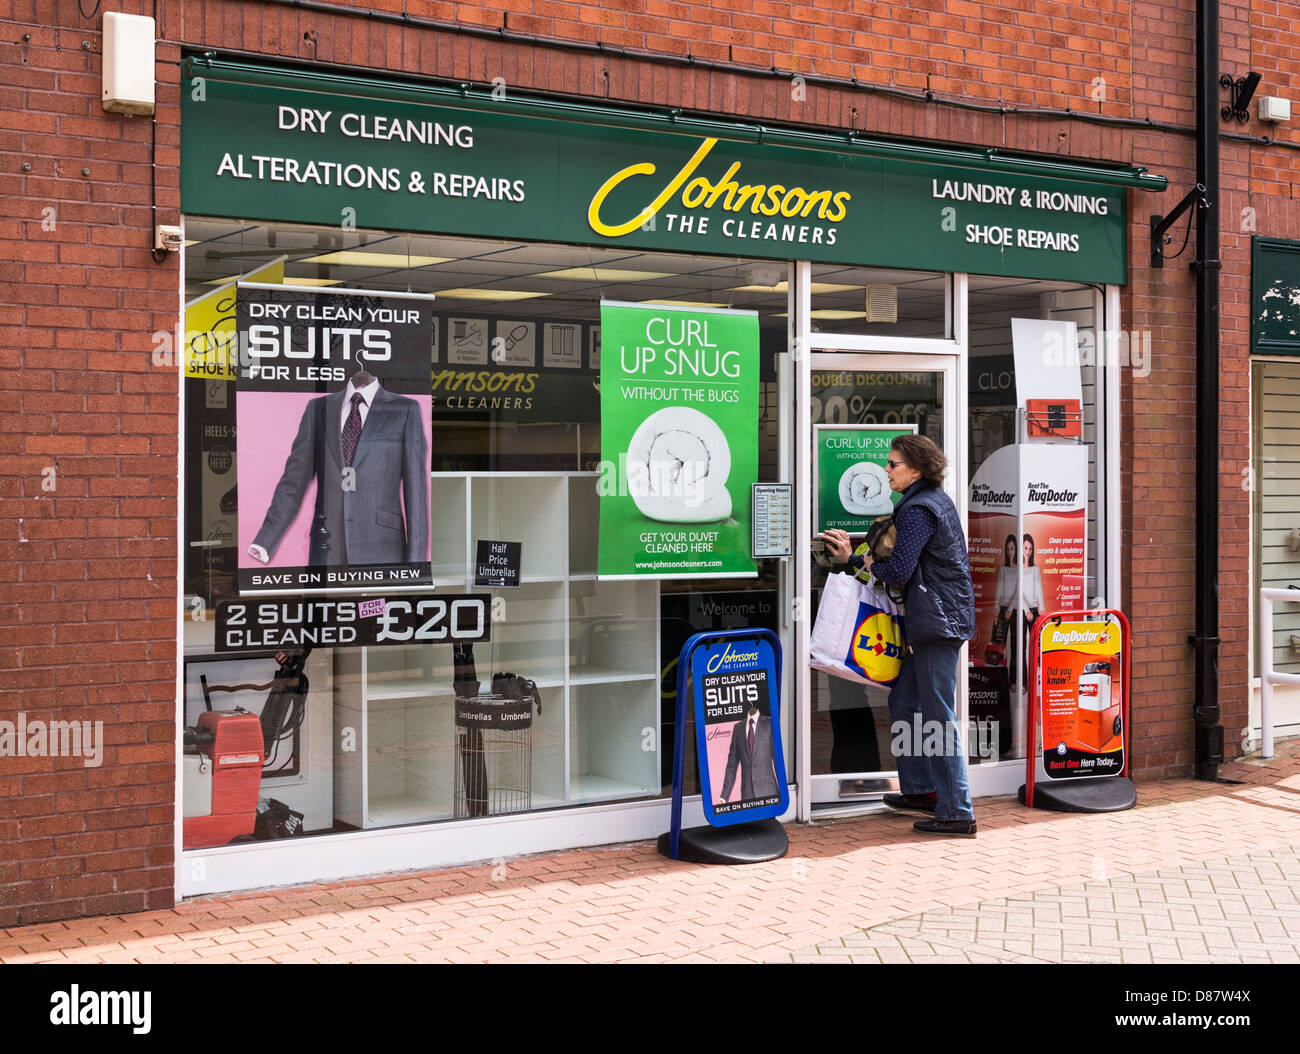 Johnsons the cleaners dry cleaning shop, UK Stock Photo